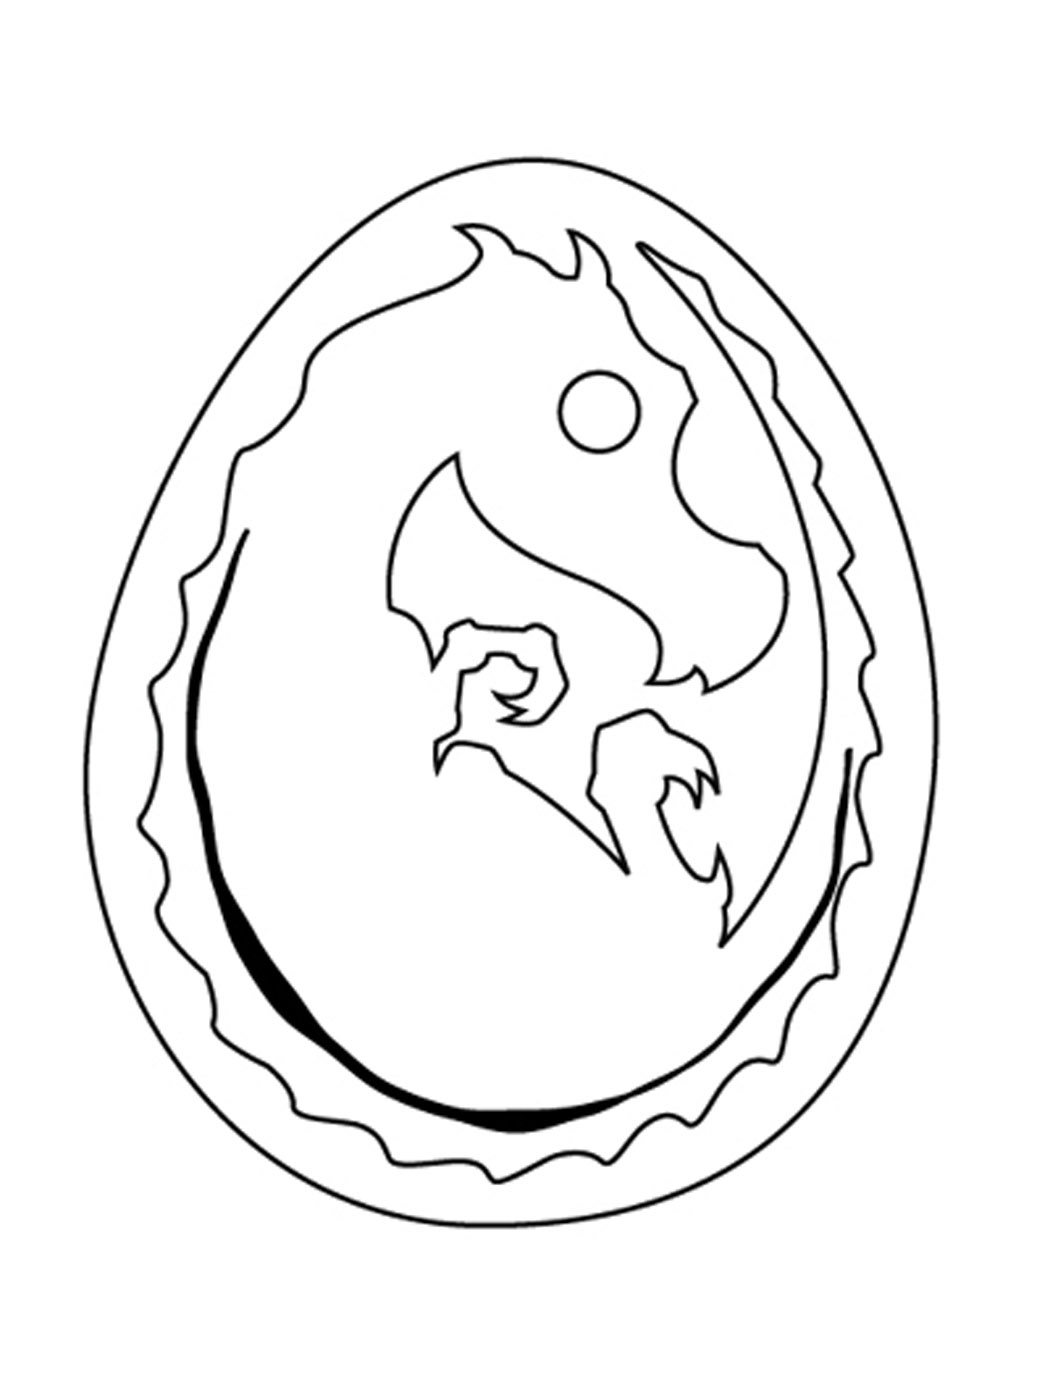 Dragon Egg Coloring Pages at GetColorings.com | Free printable